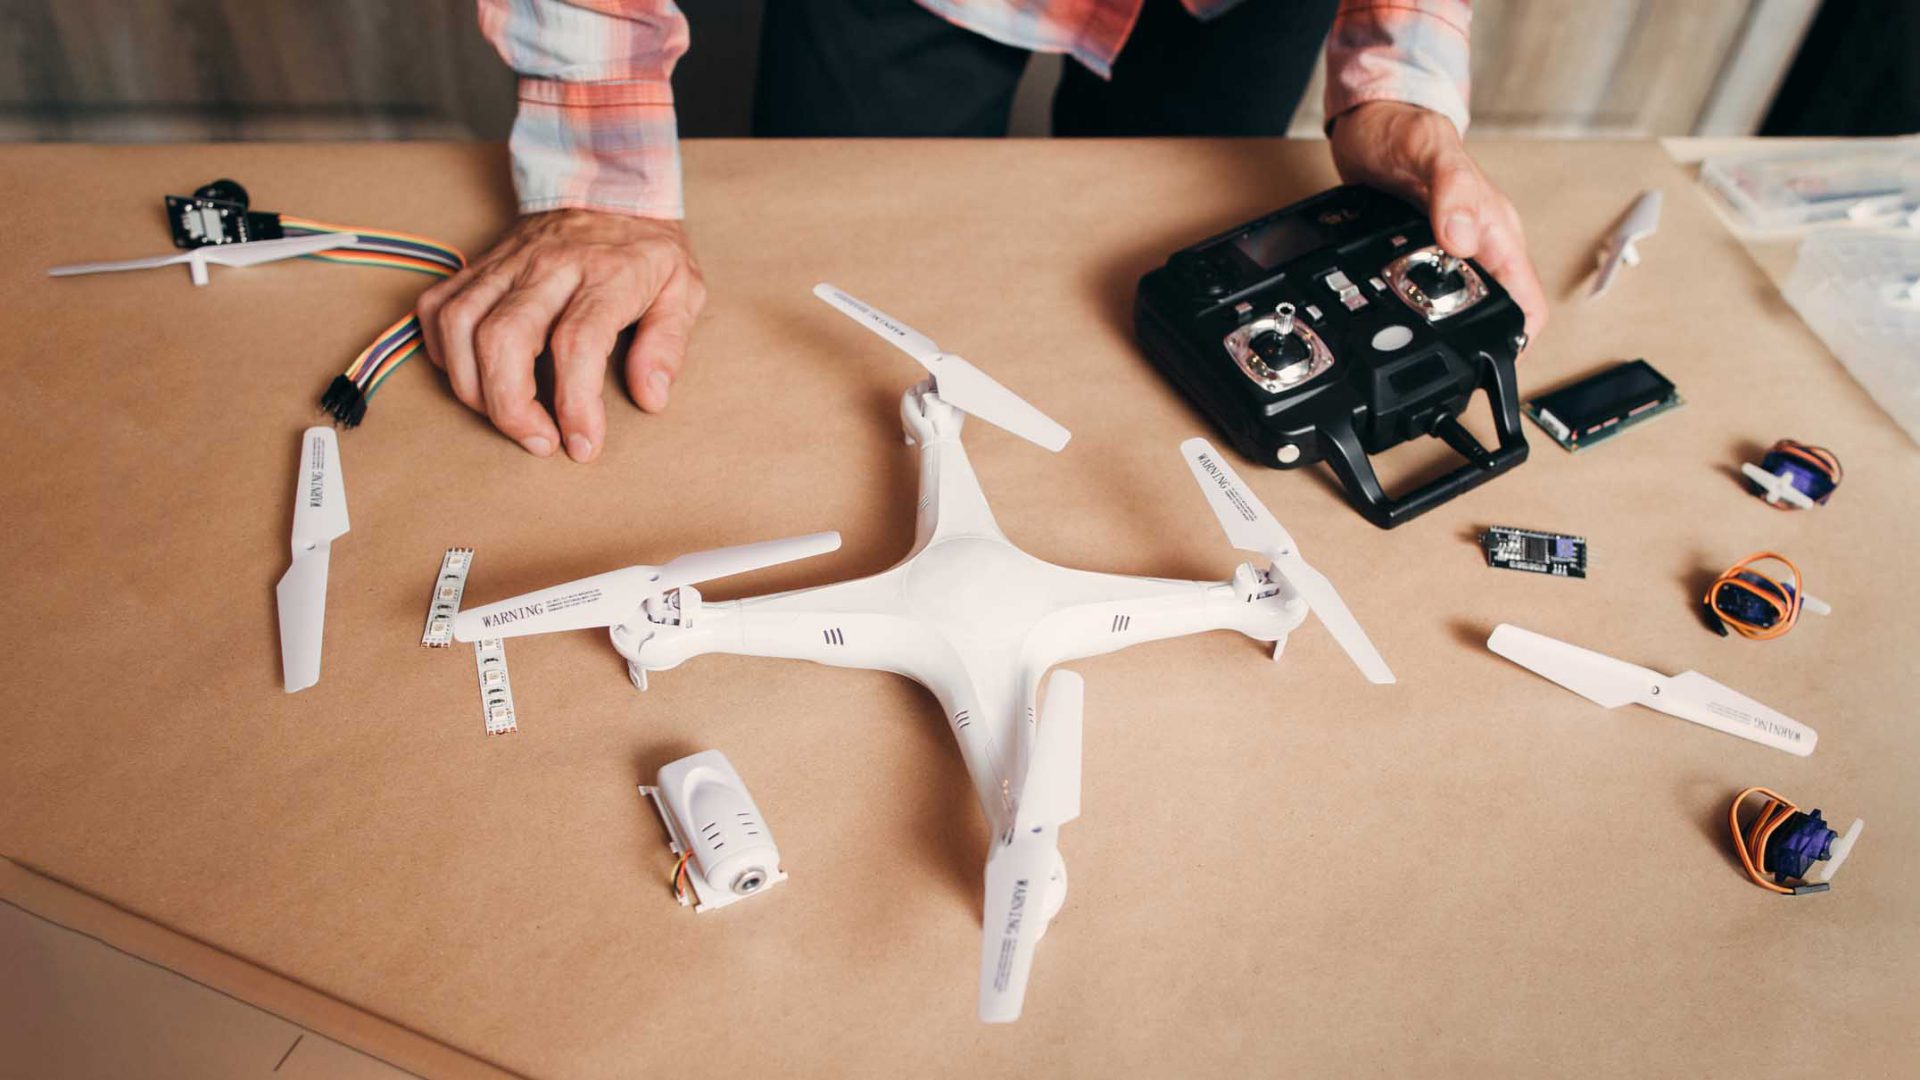 What are FPV drones and how to build your own one? DesignWanted